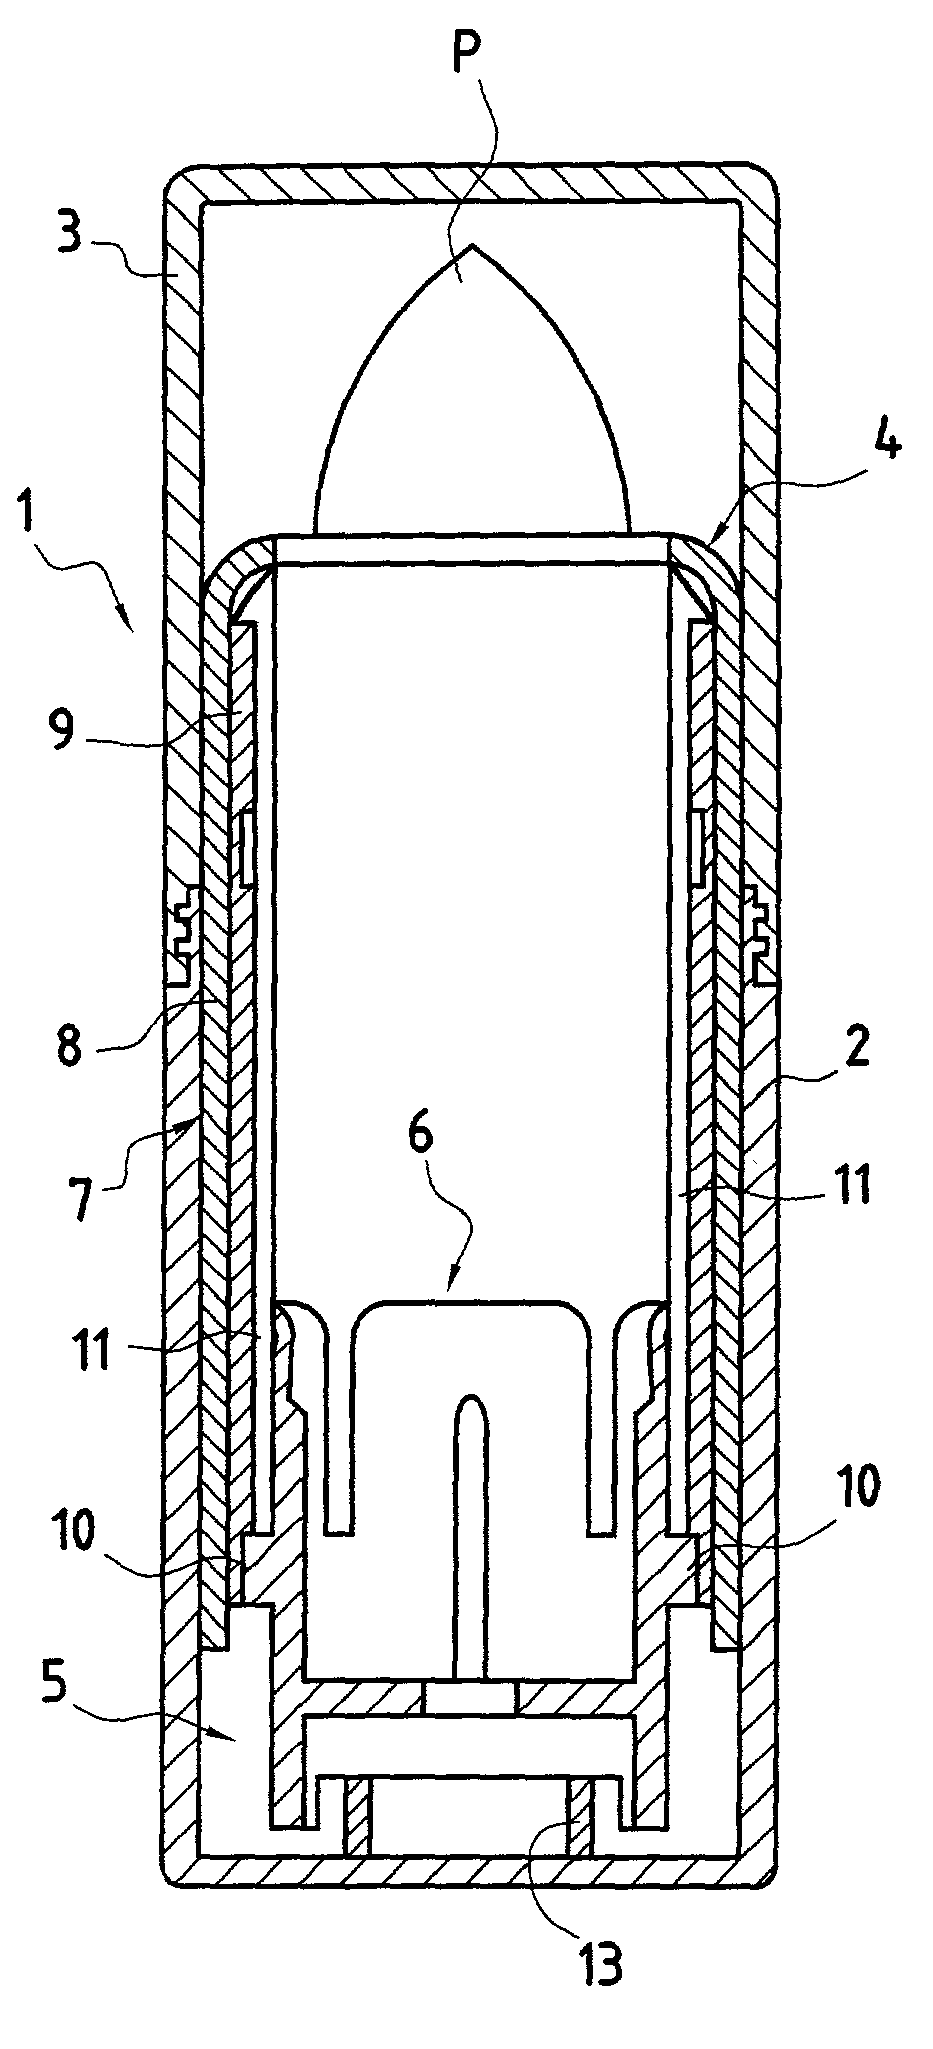 Device for packaging and applying a cosmetic or care product